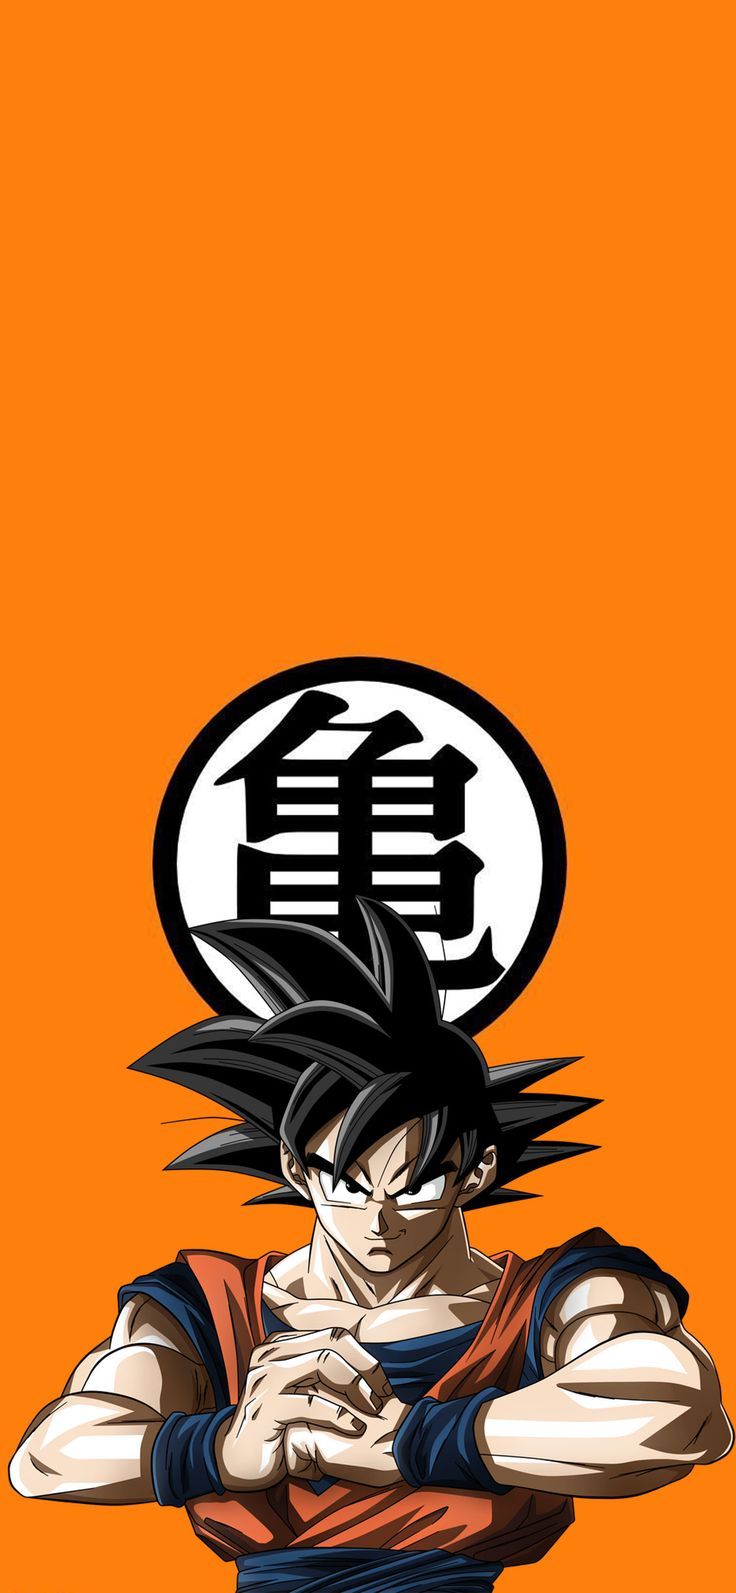 Download Dragon Ball Z wallpaper for iPhone. Anime dragon ball goku, Dragon ball z iphone wallpaper, Anime dragon ball super